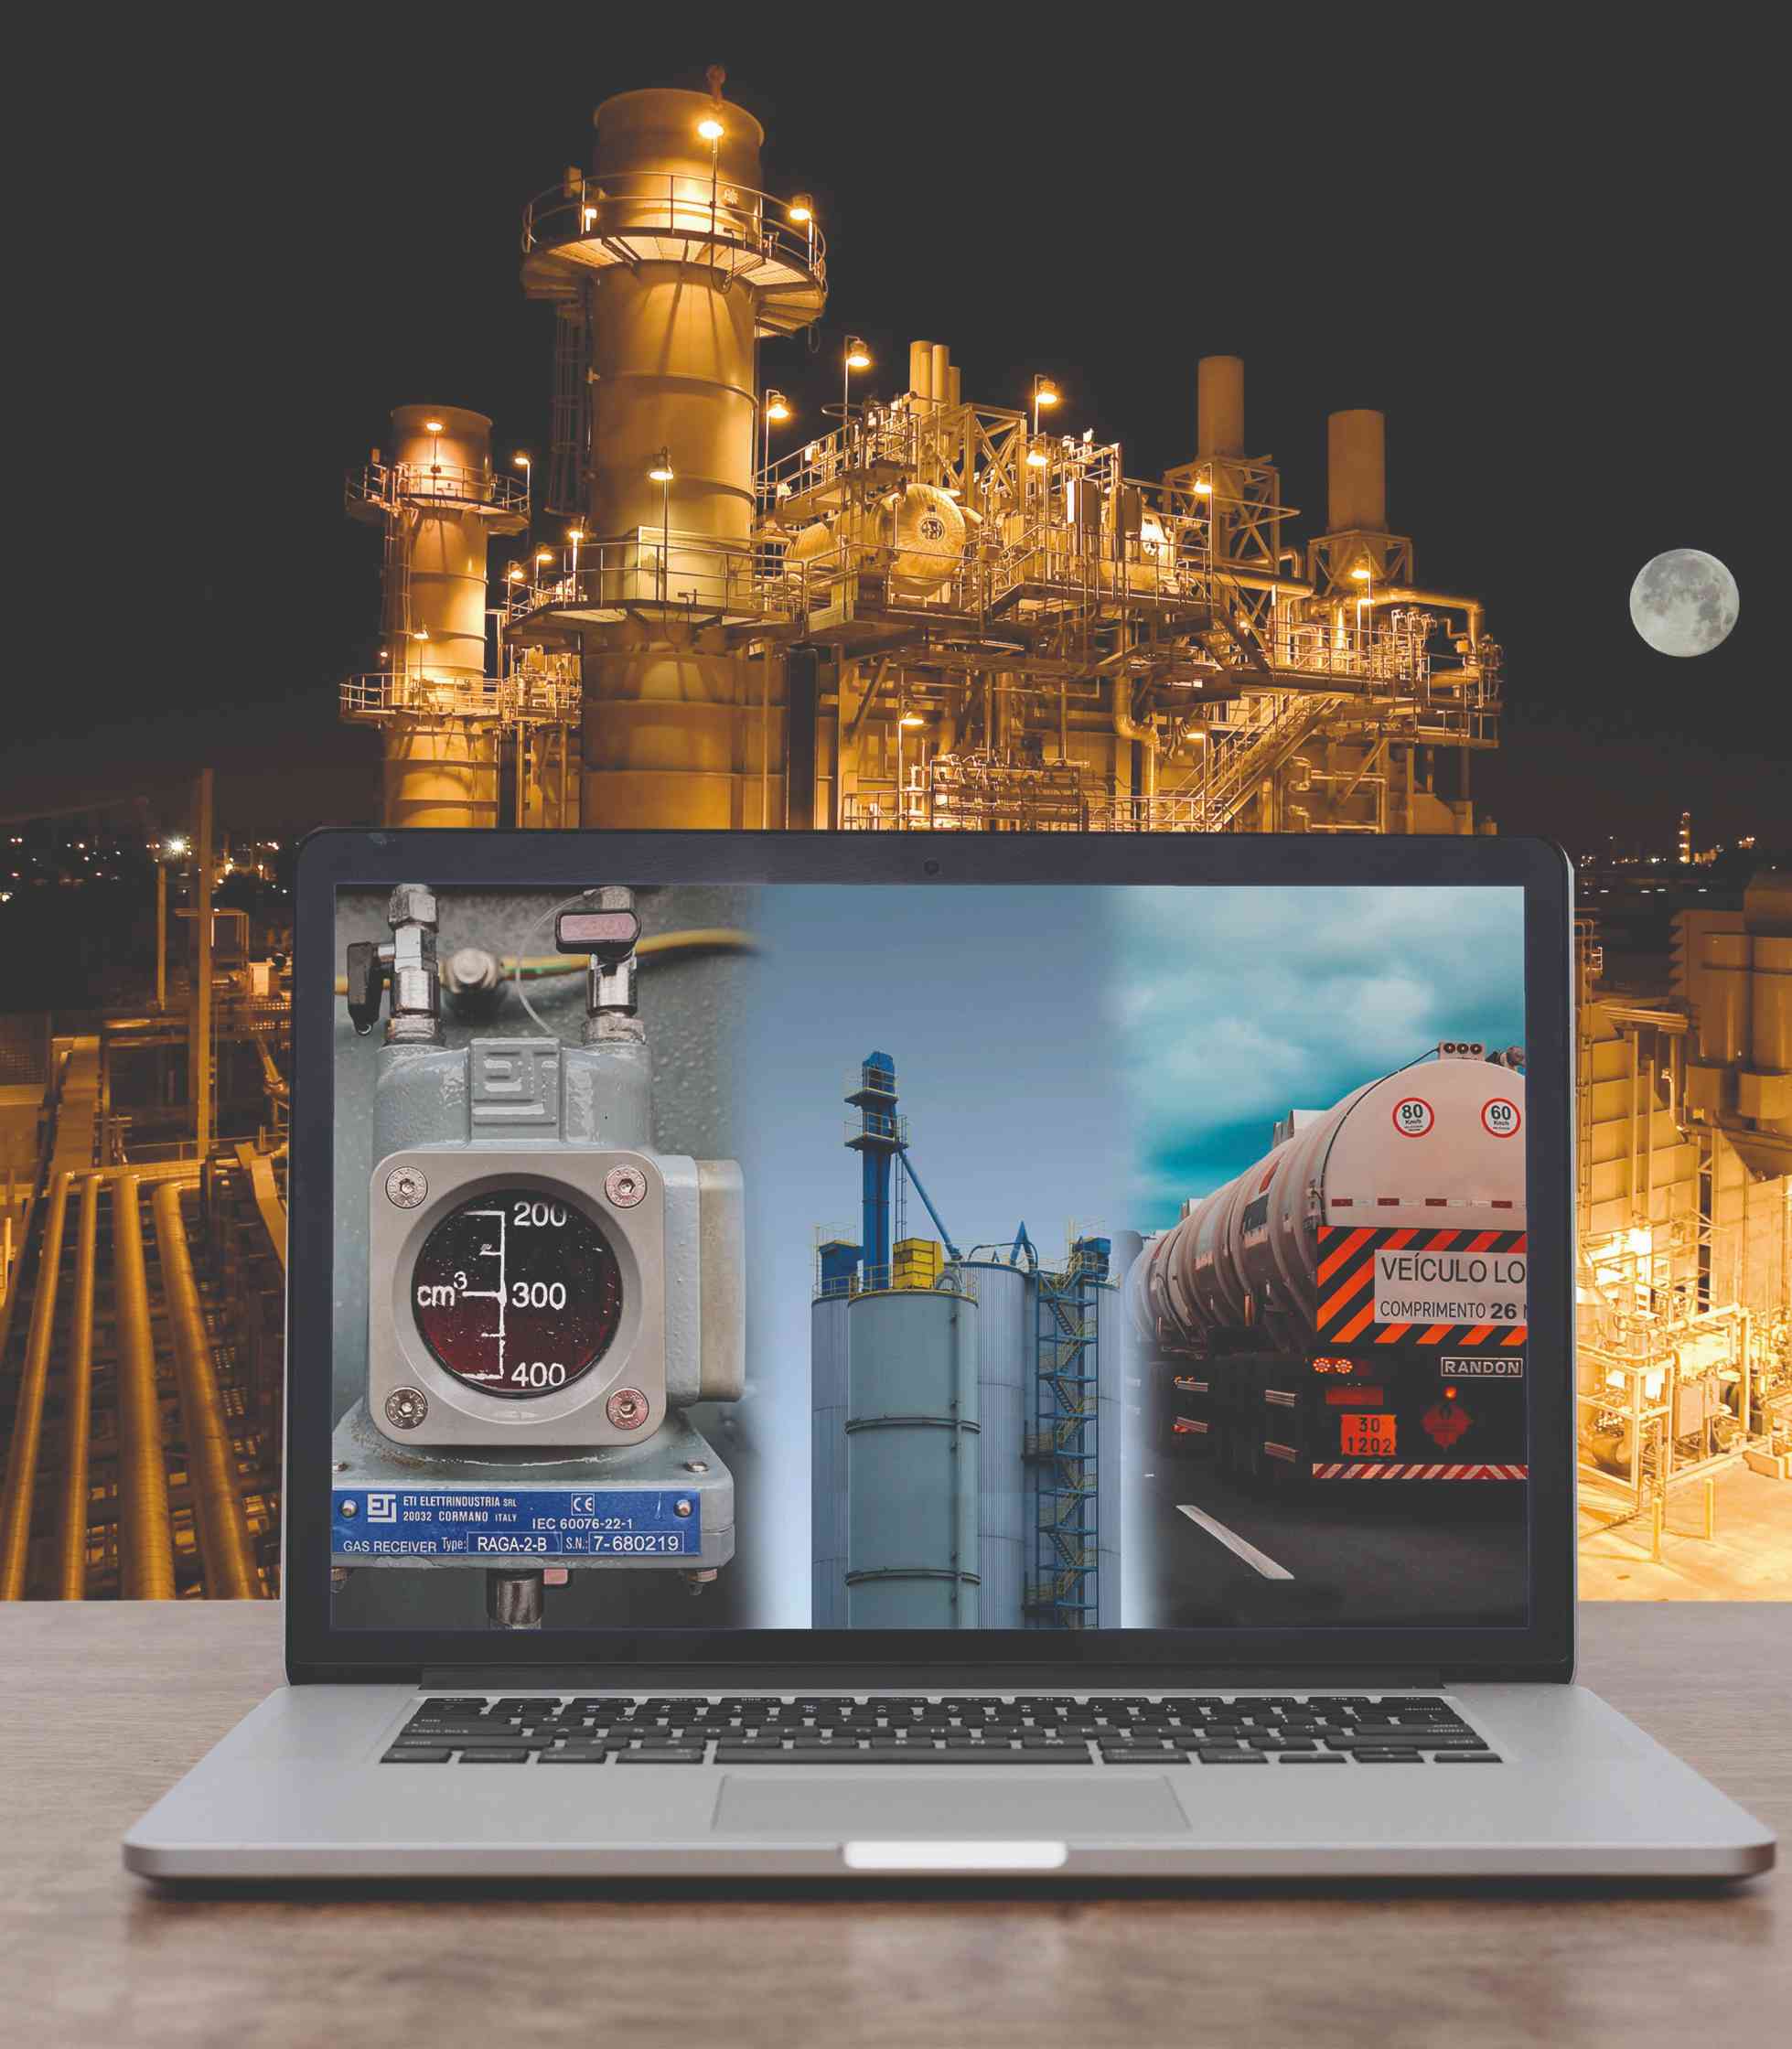 Top #1 Oil & Gas Industry Utility Management ERP Software in Dubai | Abu Dhabi | Best Oil & Gas Software in UAE, Middle East